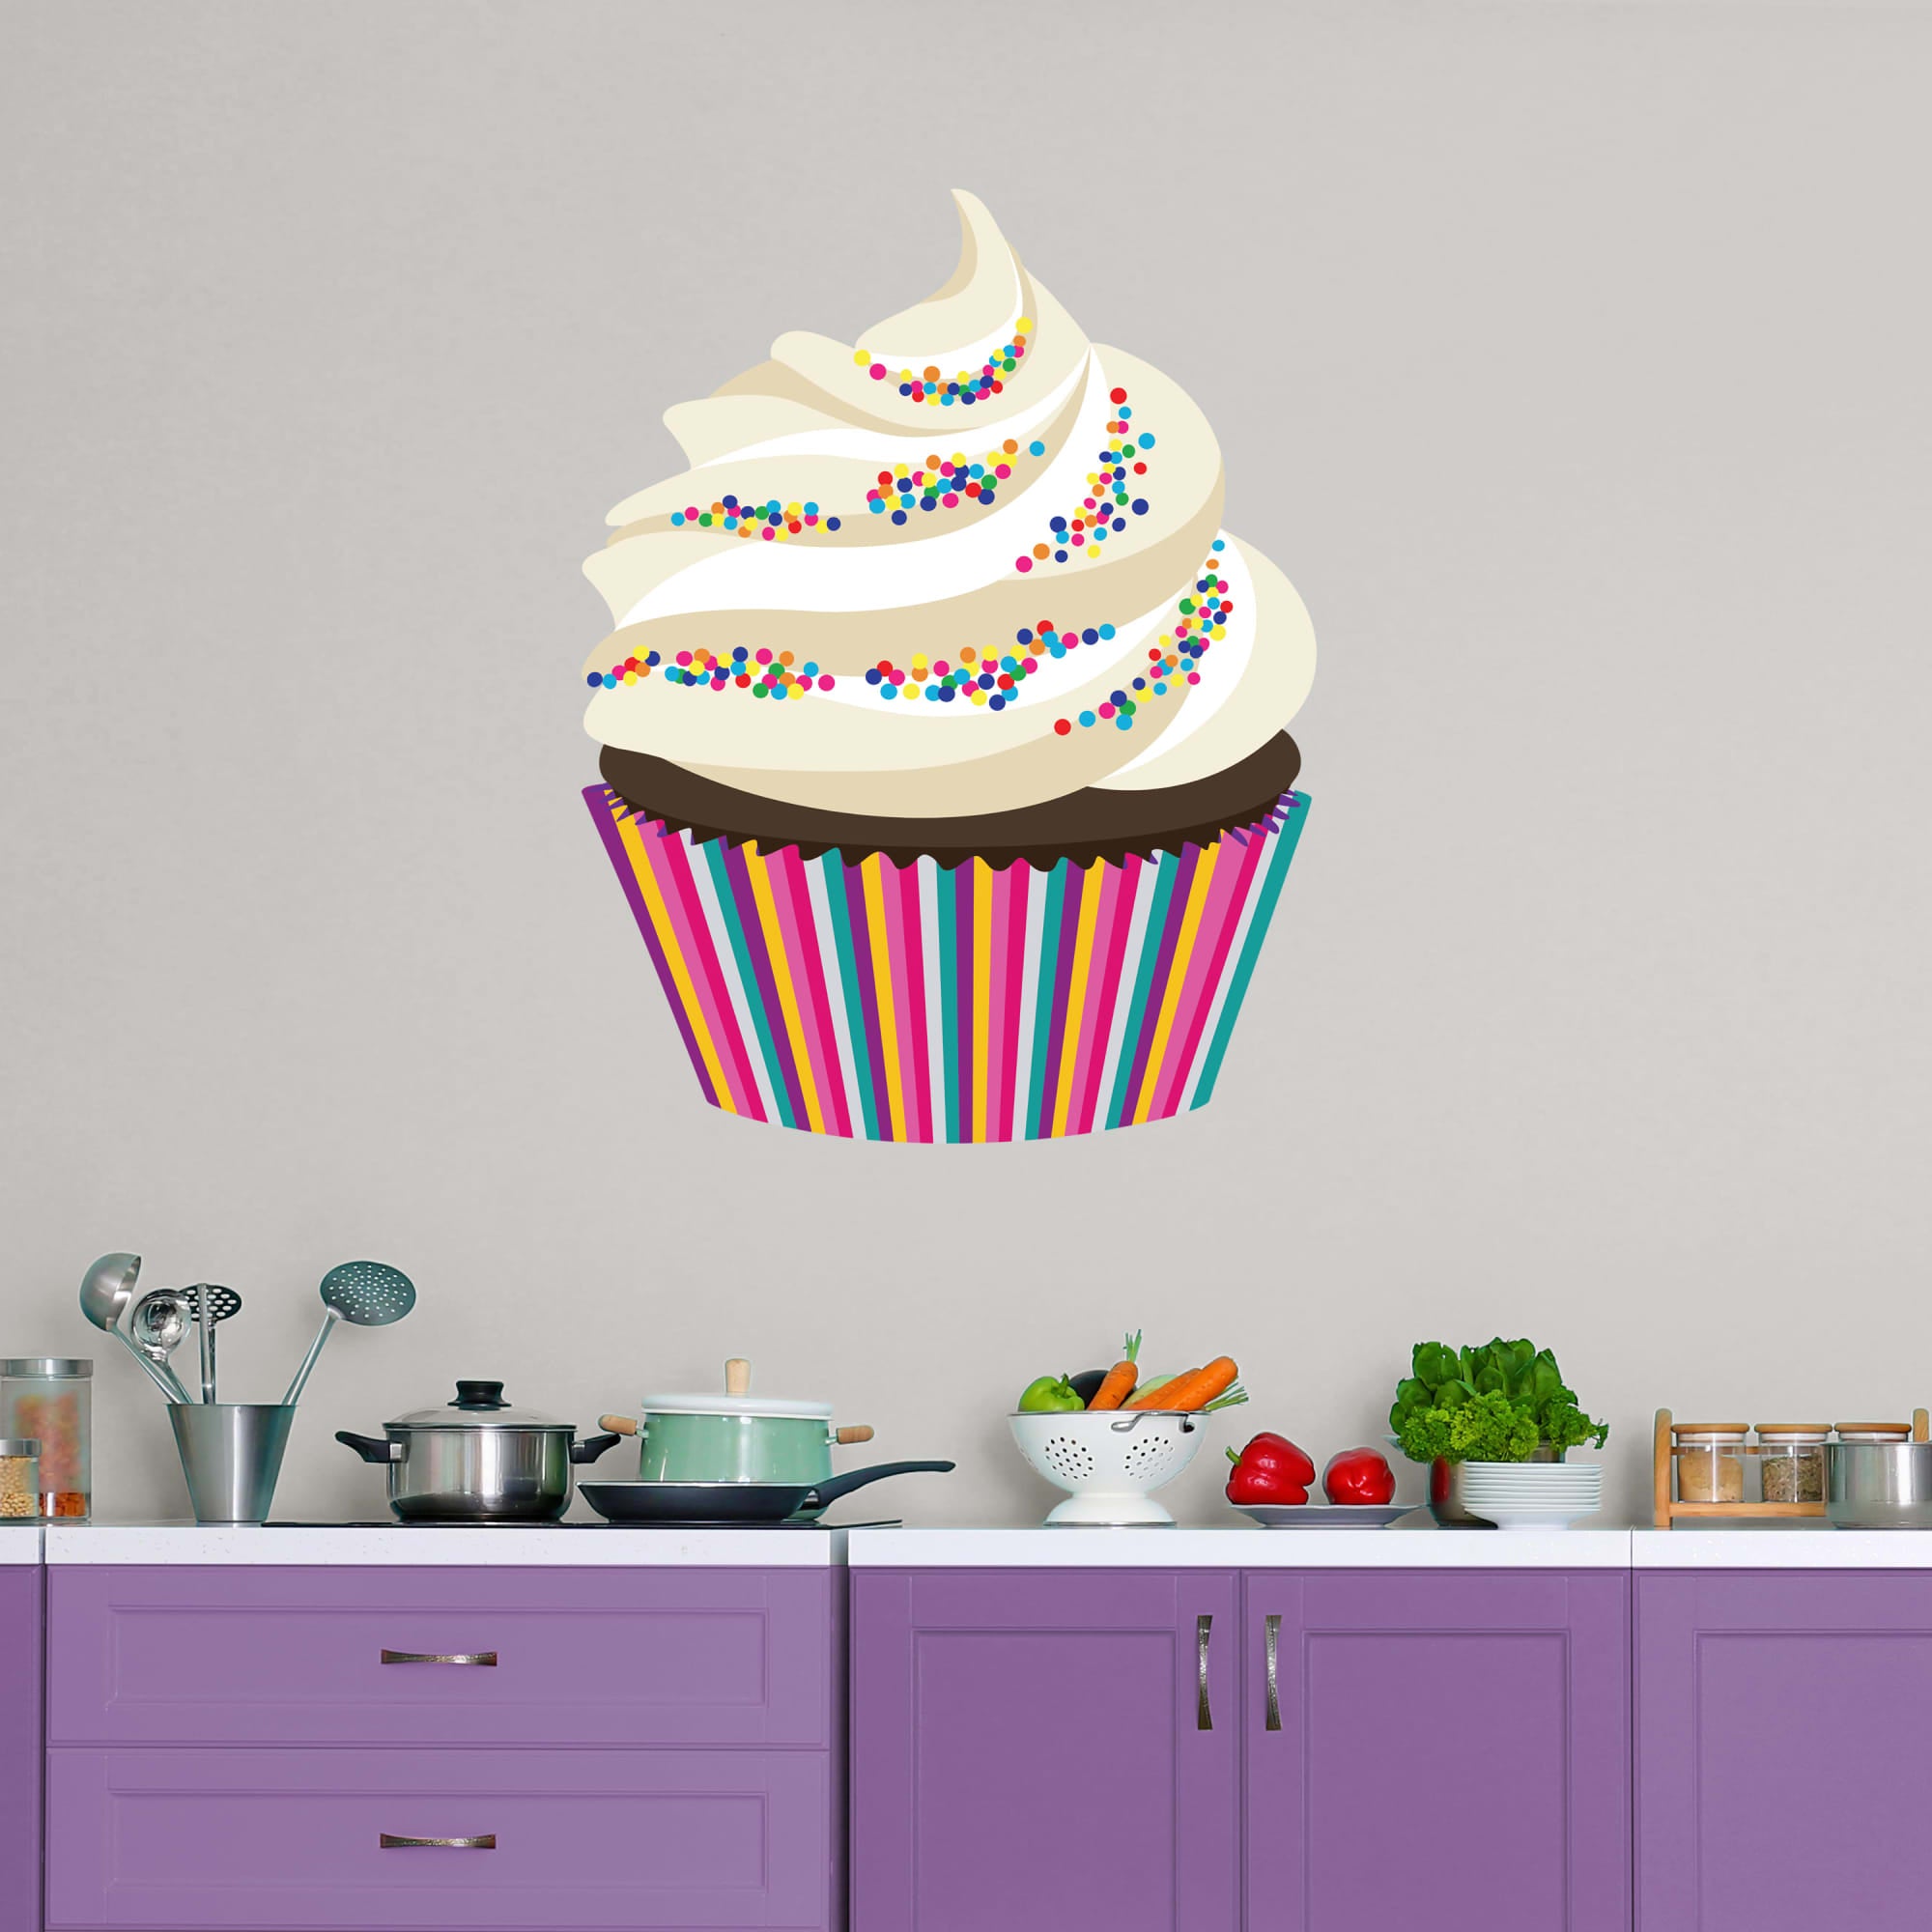 Cupcake: Illustrated - Removable Vinyl Decal Giant Cupcake + 2 Decals (34"W x 45"H) by Fathead